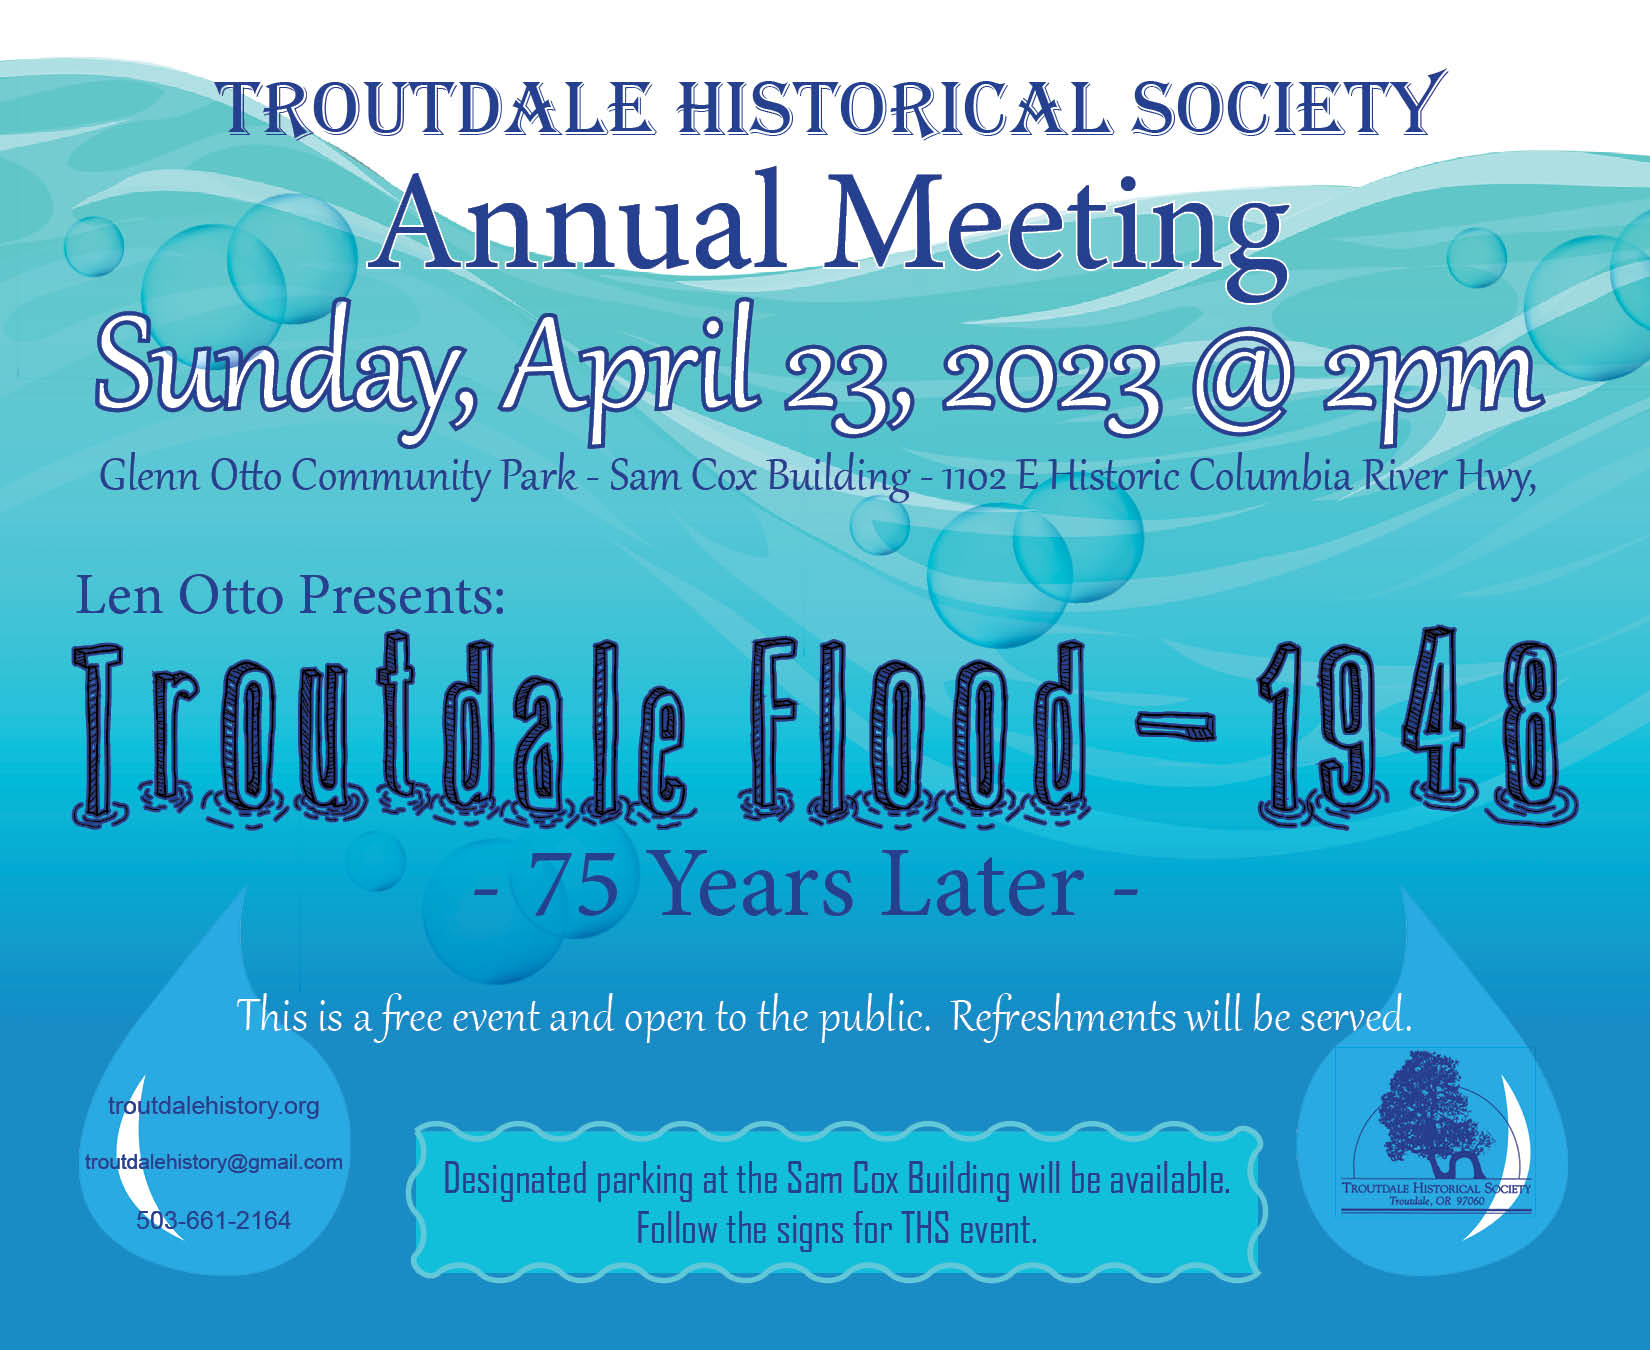 Troutdale Historical Society Annual Meeting